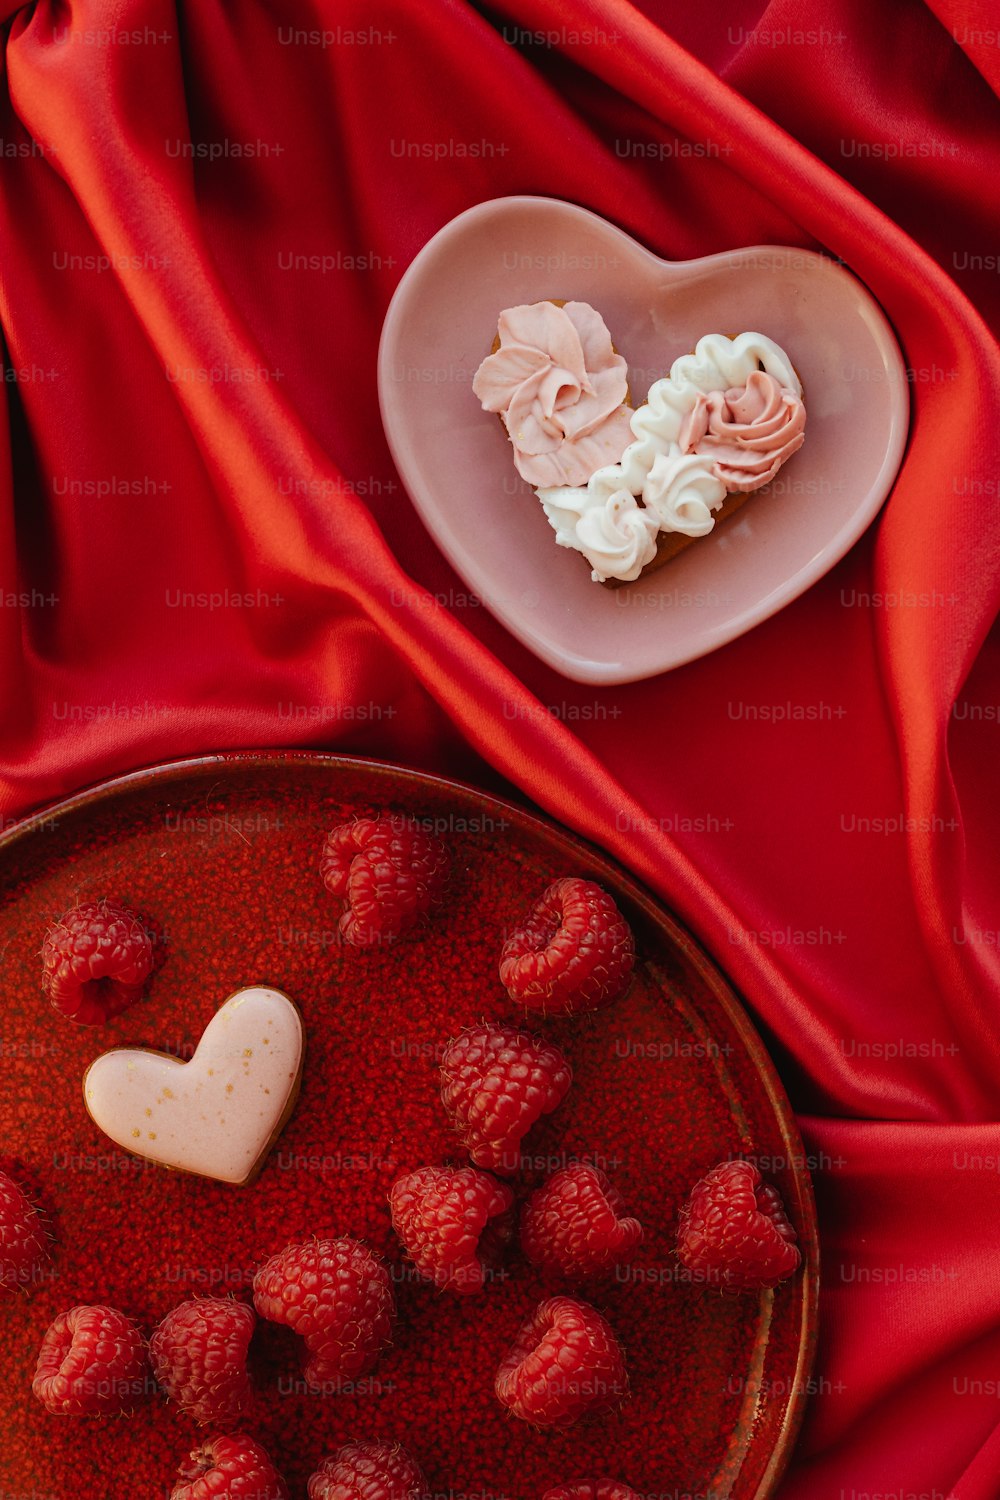 a bowl of raspberries next to a heart shaped cookie